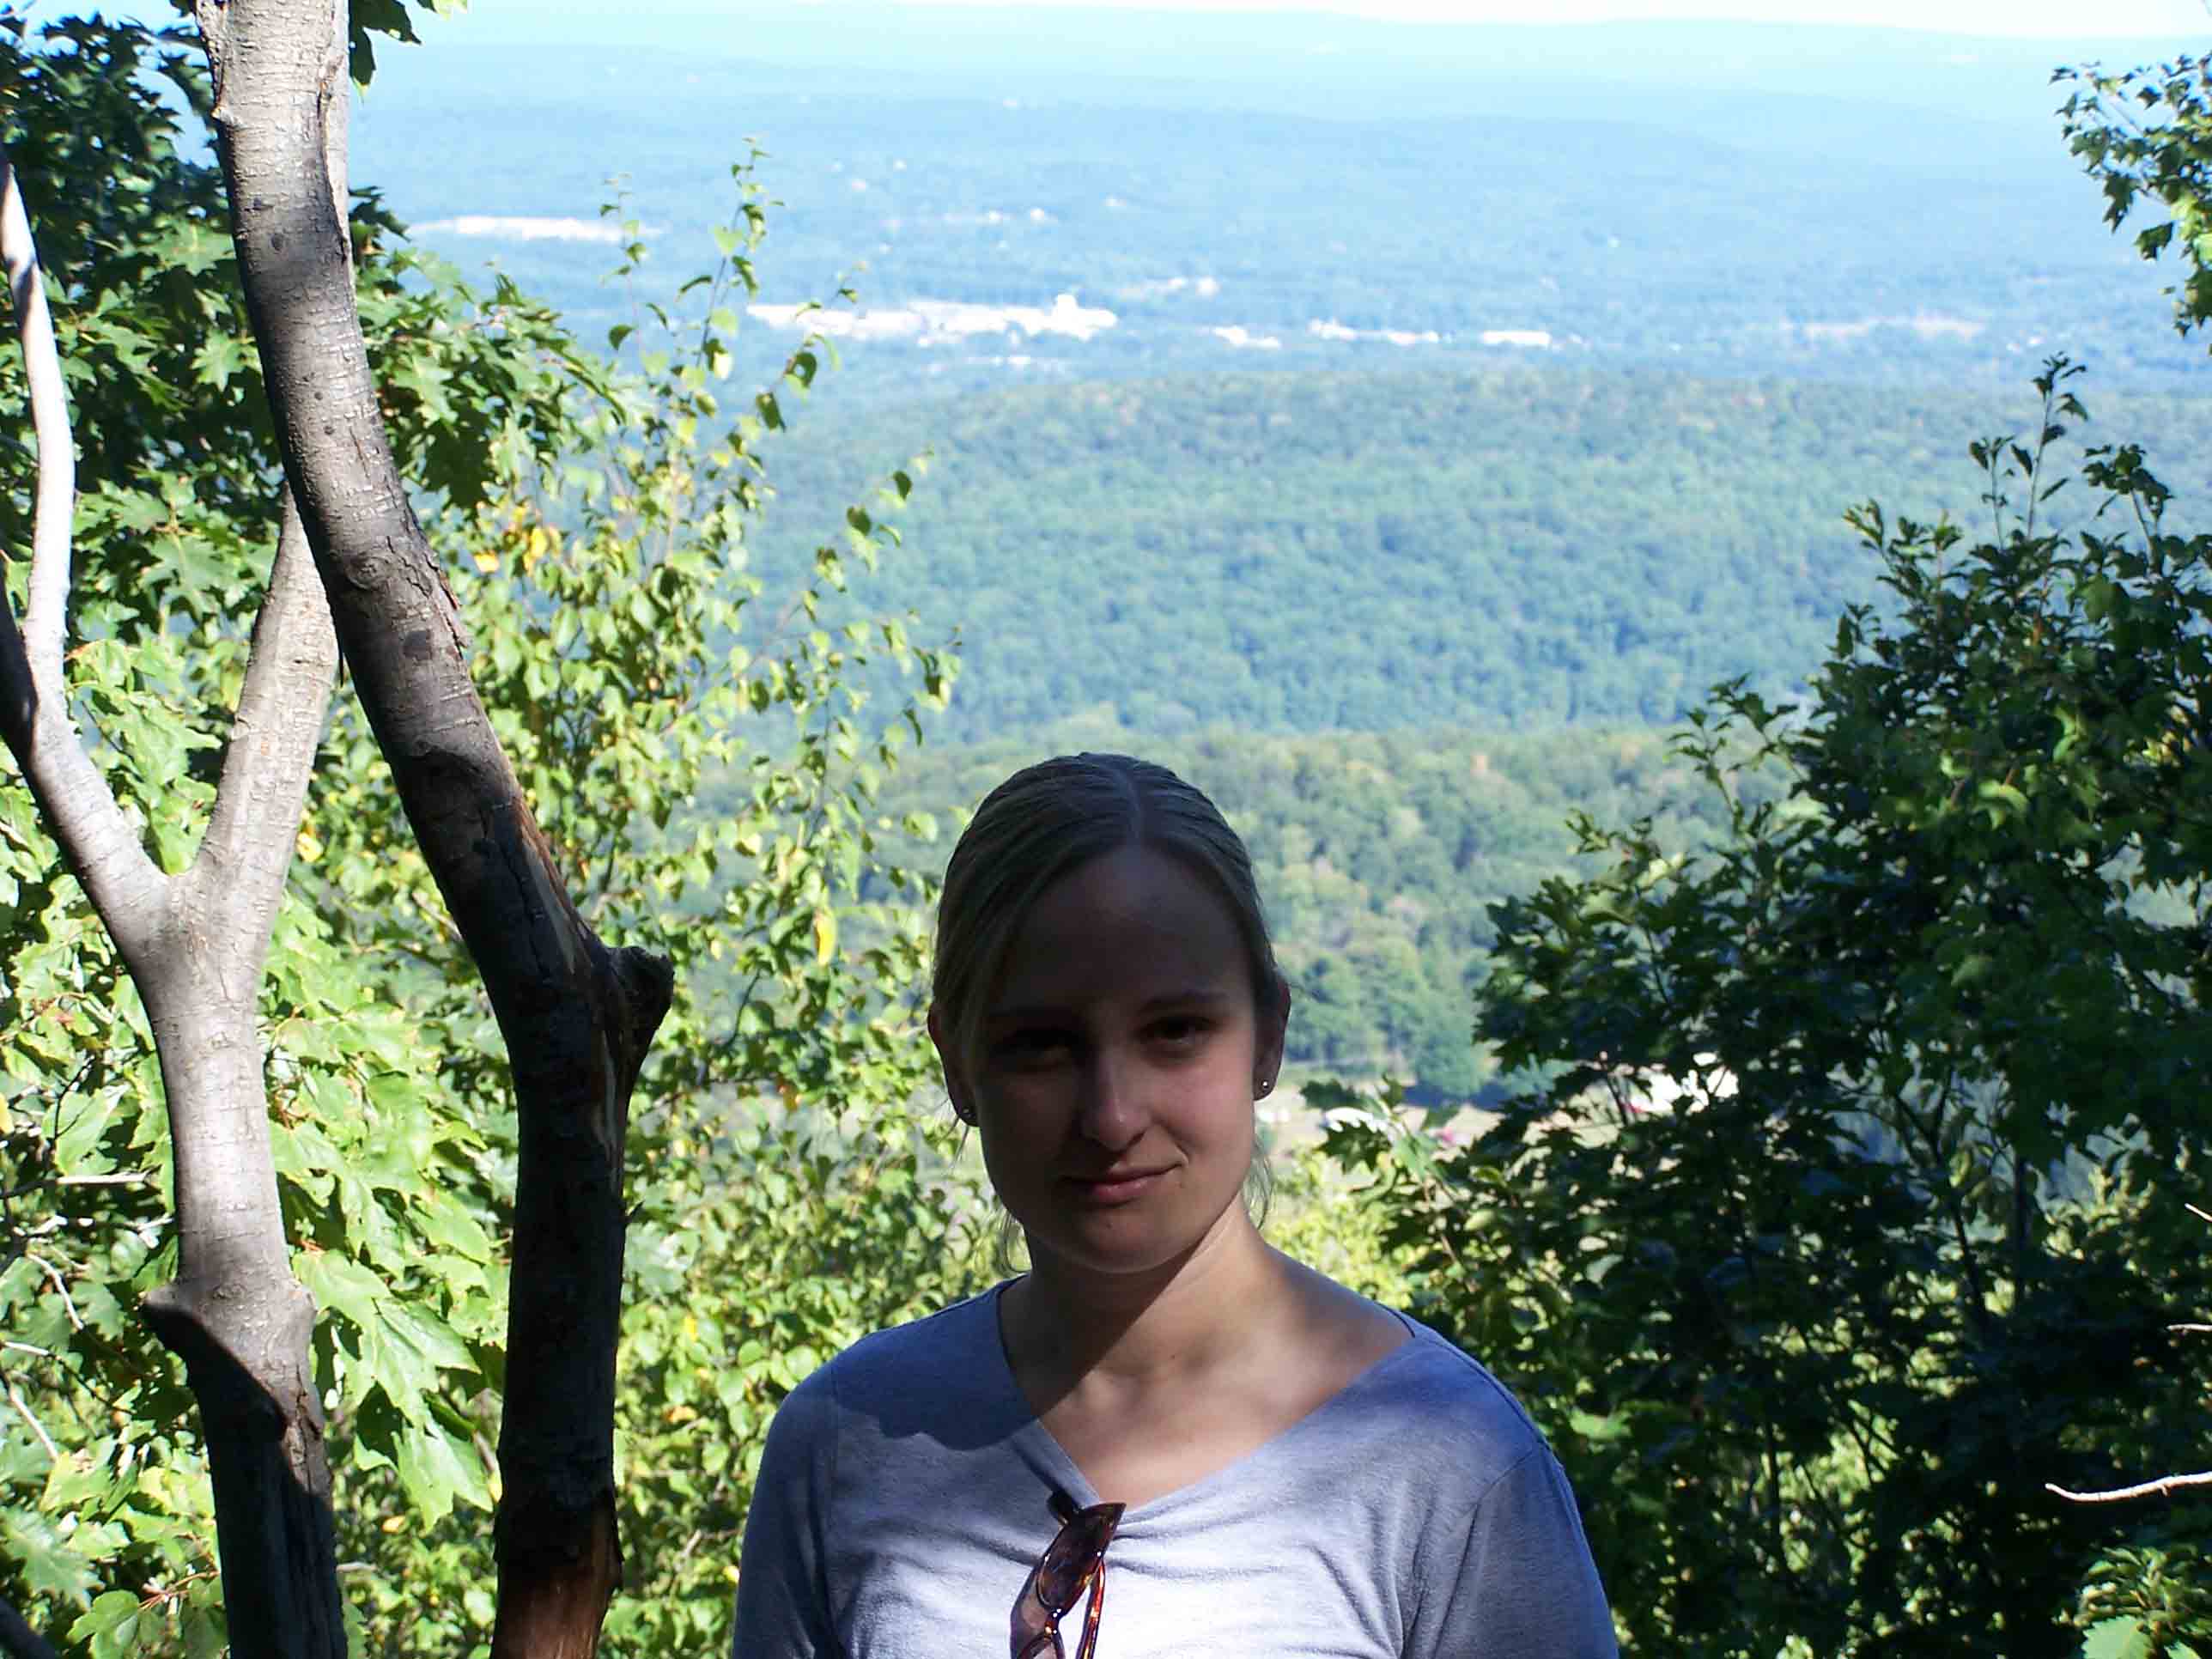 Heather and view of Stroudsburg - mile 7.4. Courtesy at@rohland.org